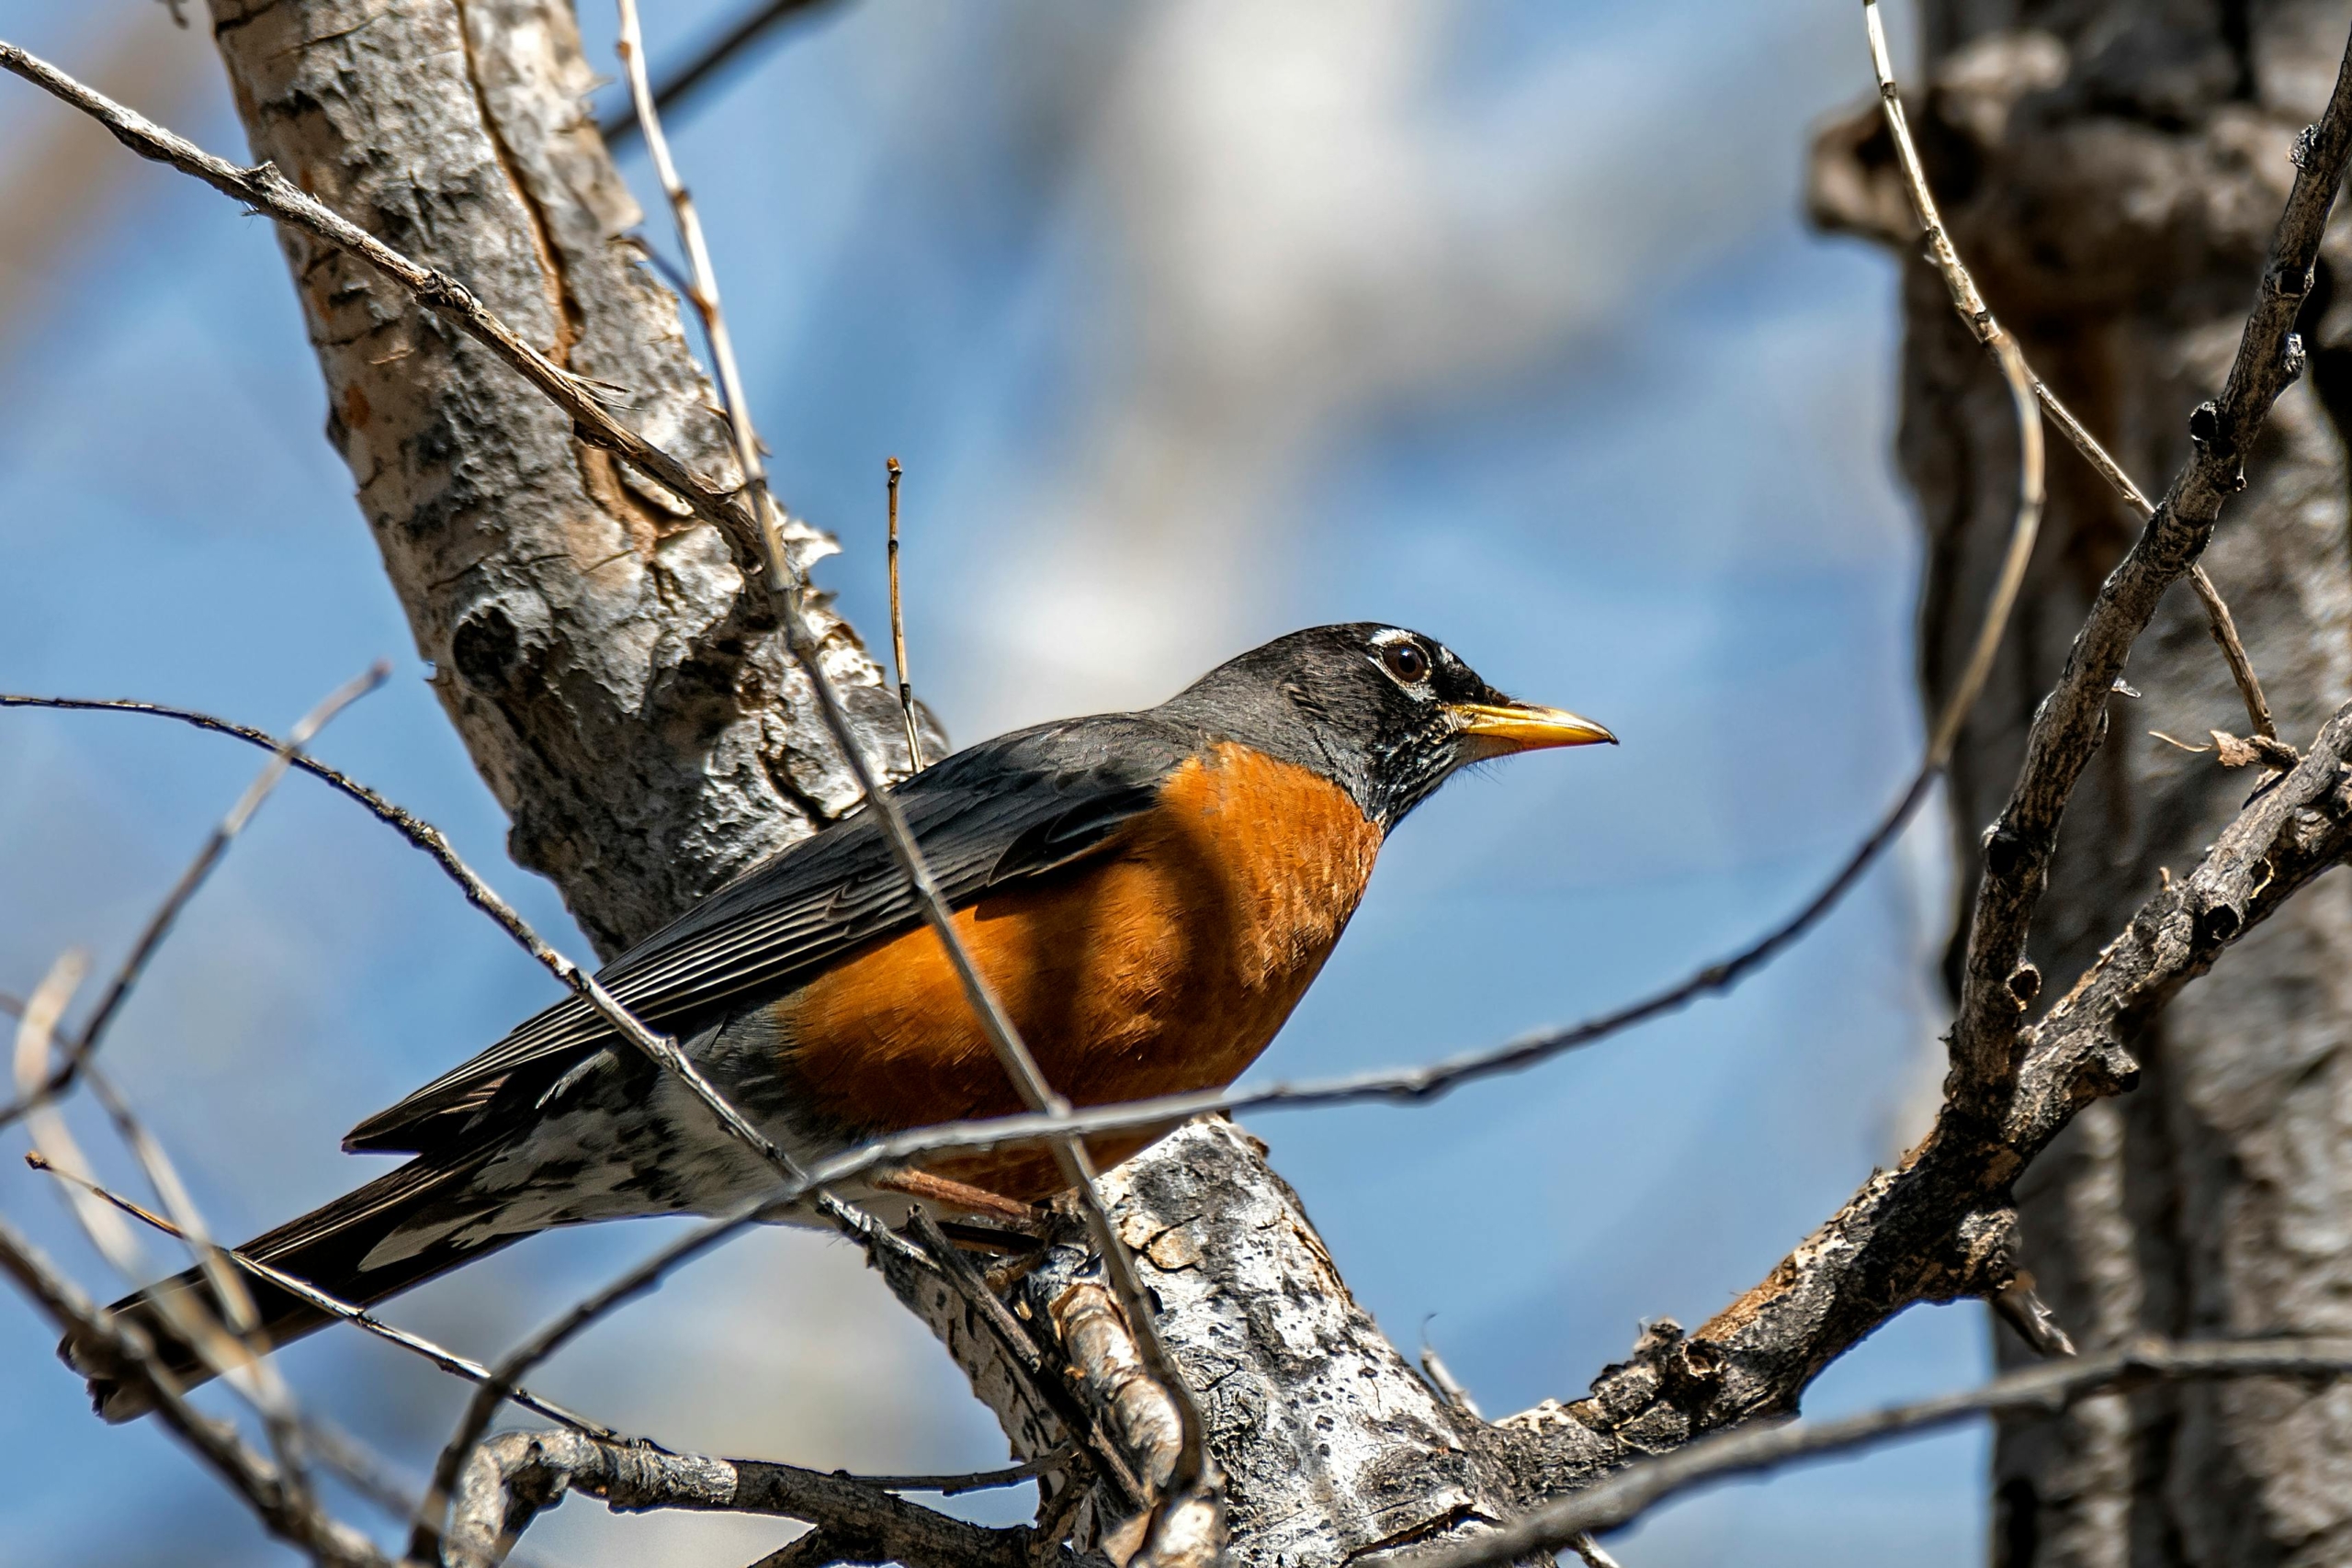 A black and orange American Robin perched on the branch of a tree